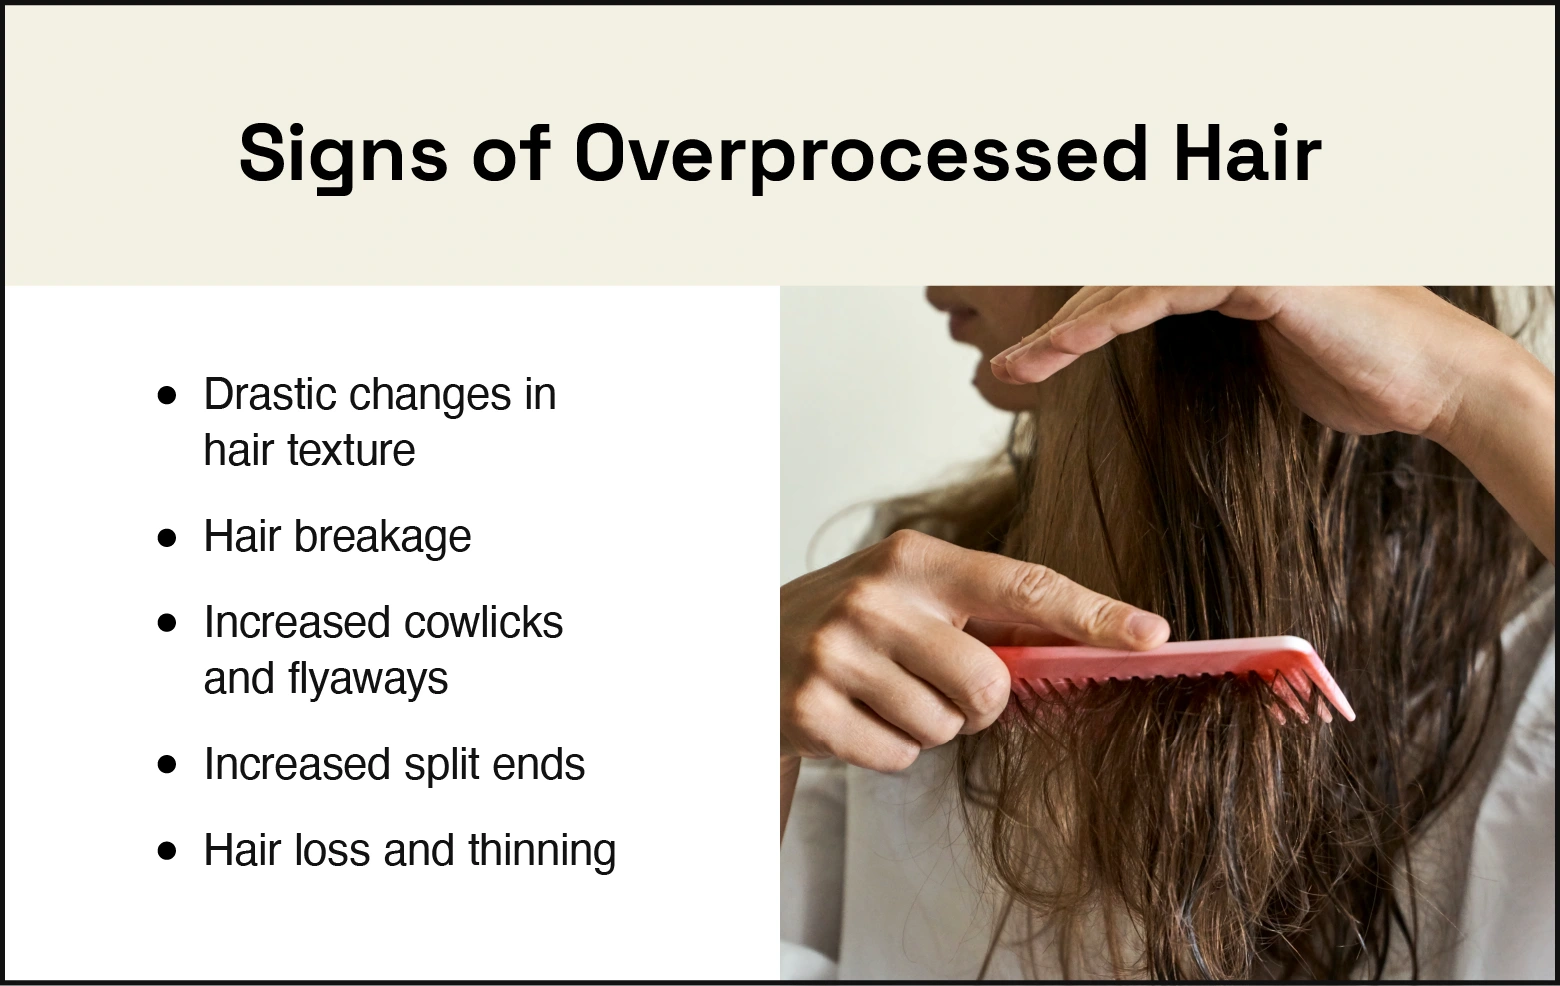 Signs of over processed hair are drastic changes in hair texture, unexplained hair breakage, increased cowlicks and flyaways, increased split ends, hair loss, and thinning.